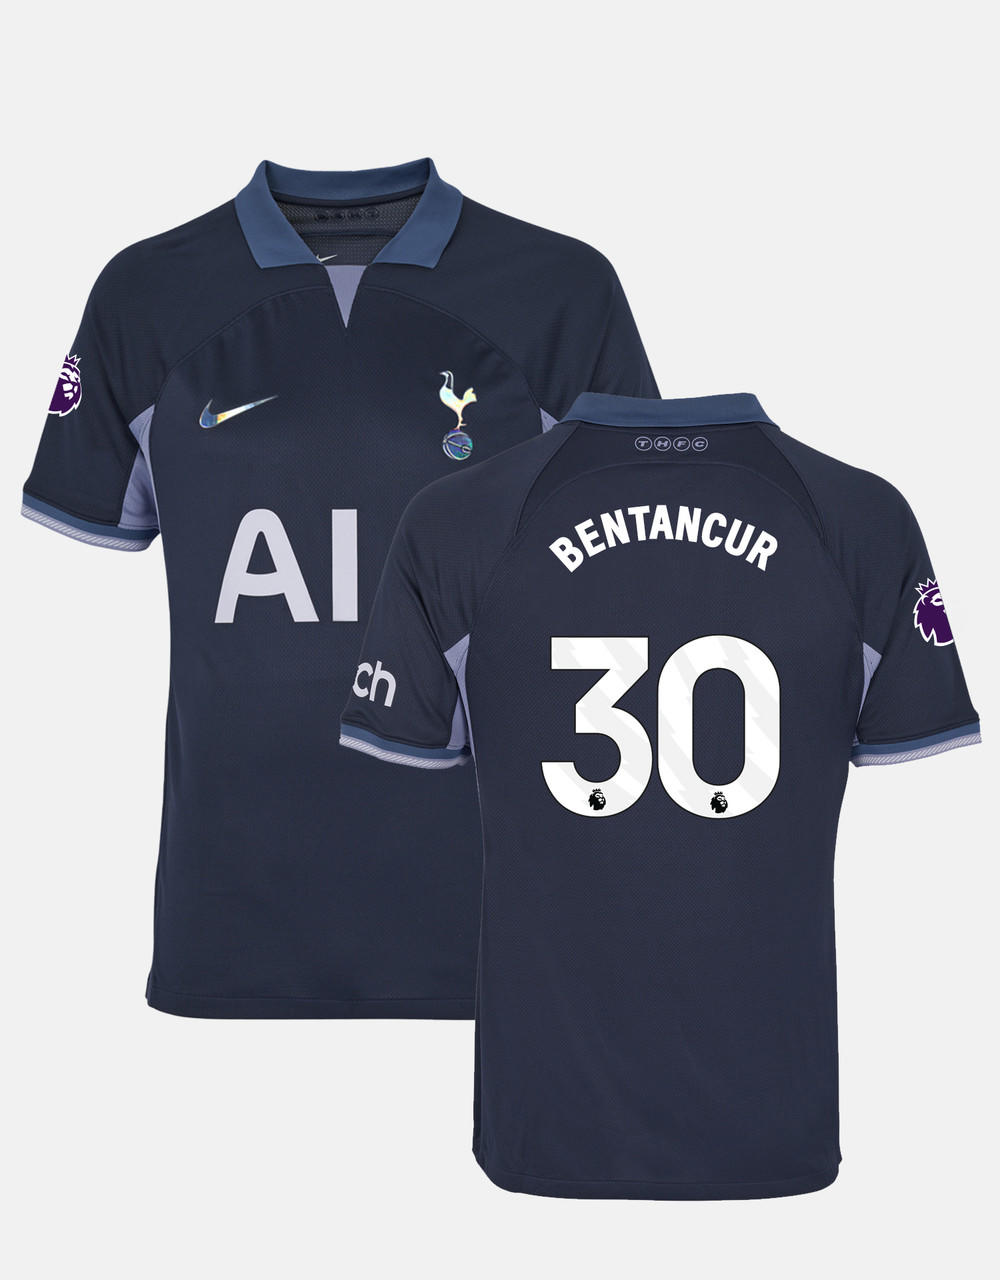 Tottenham drop clear transfer hint as they announce new shirt